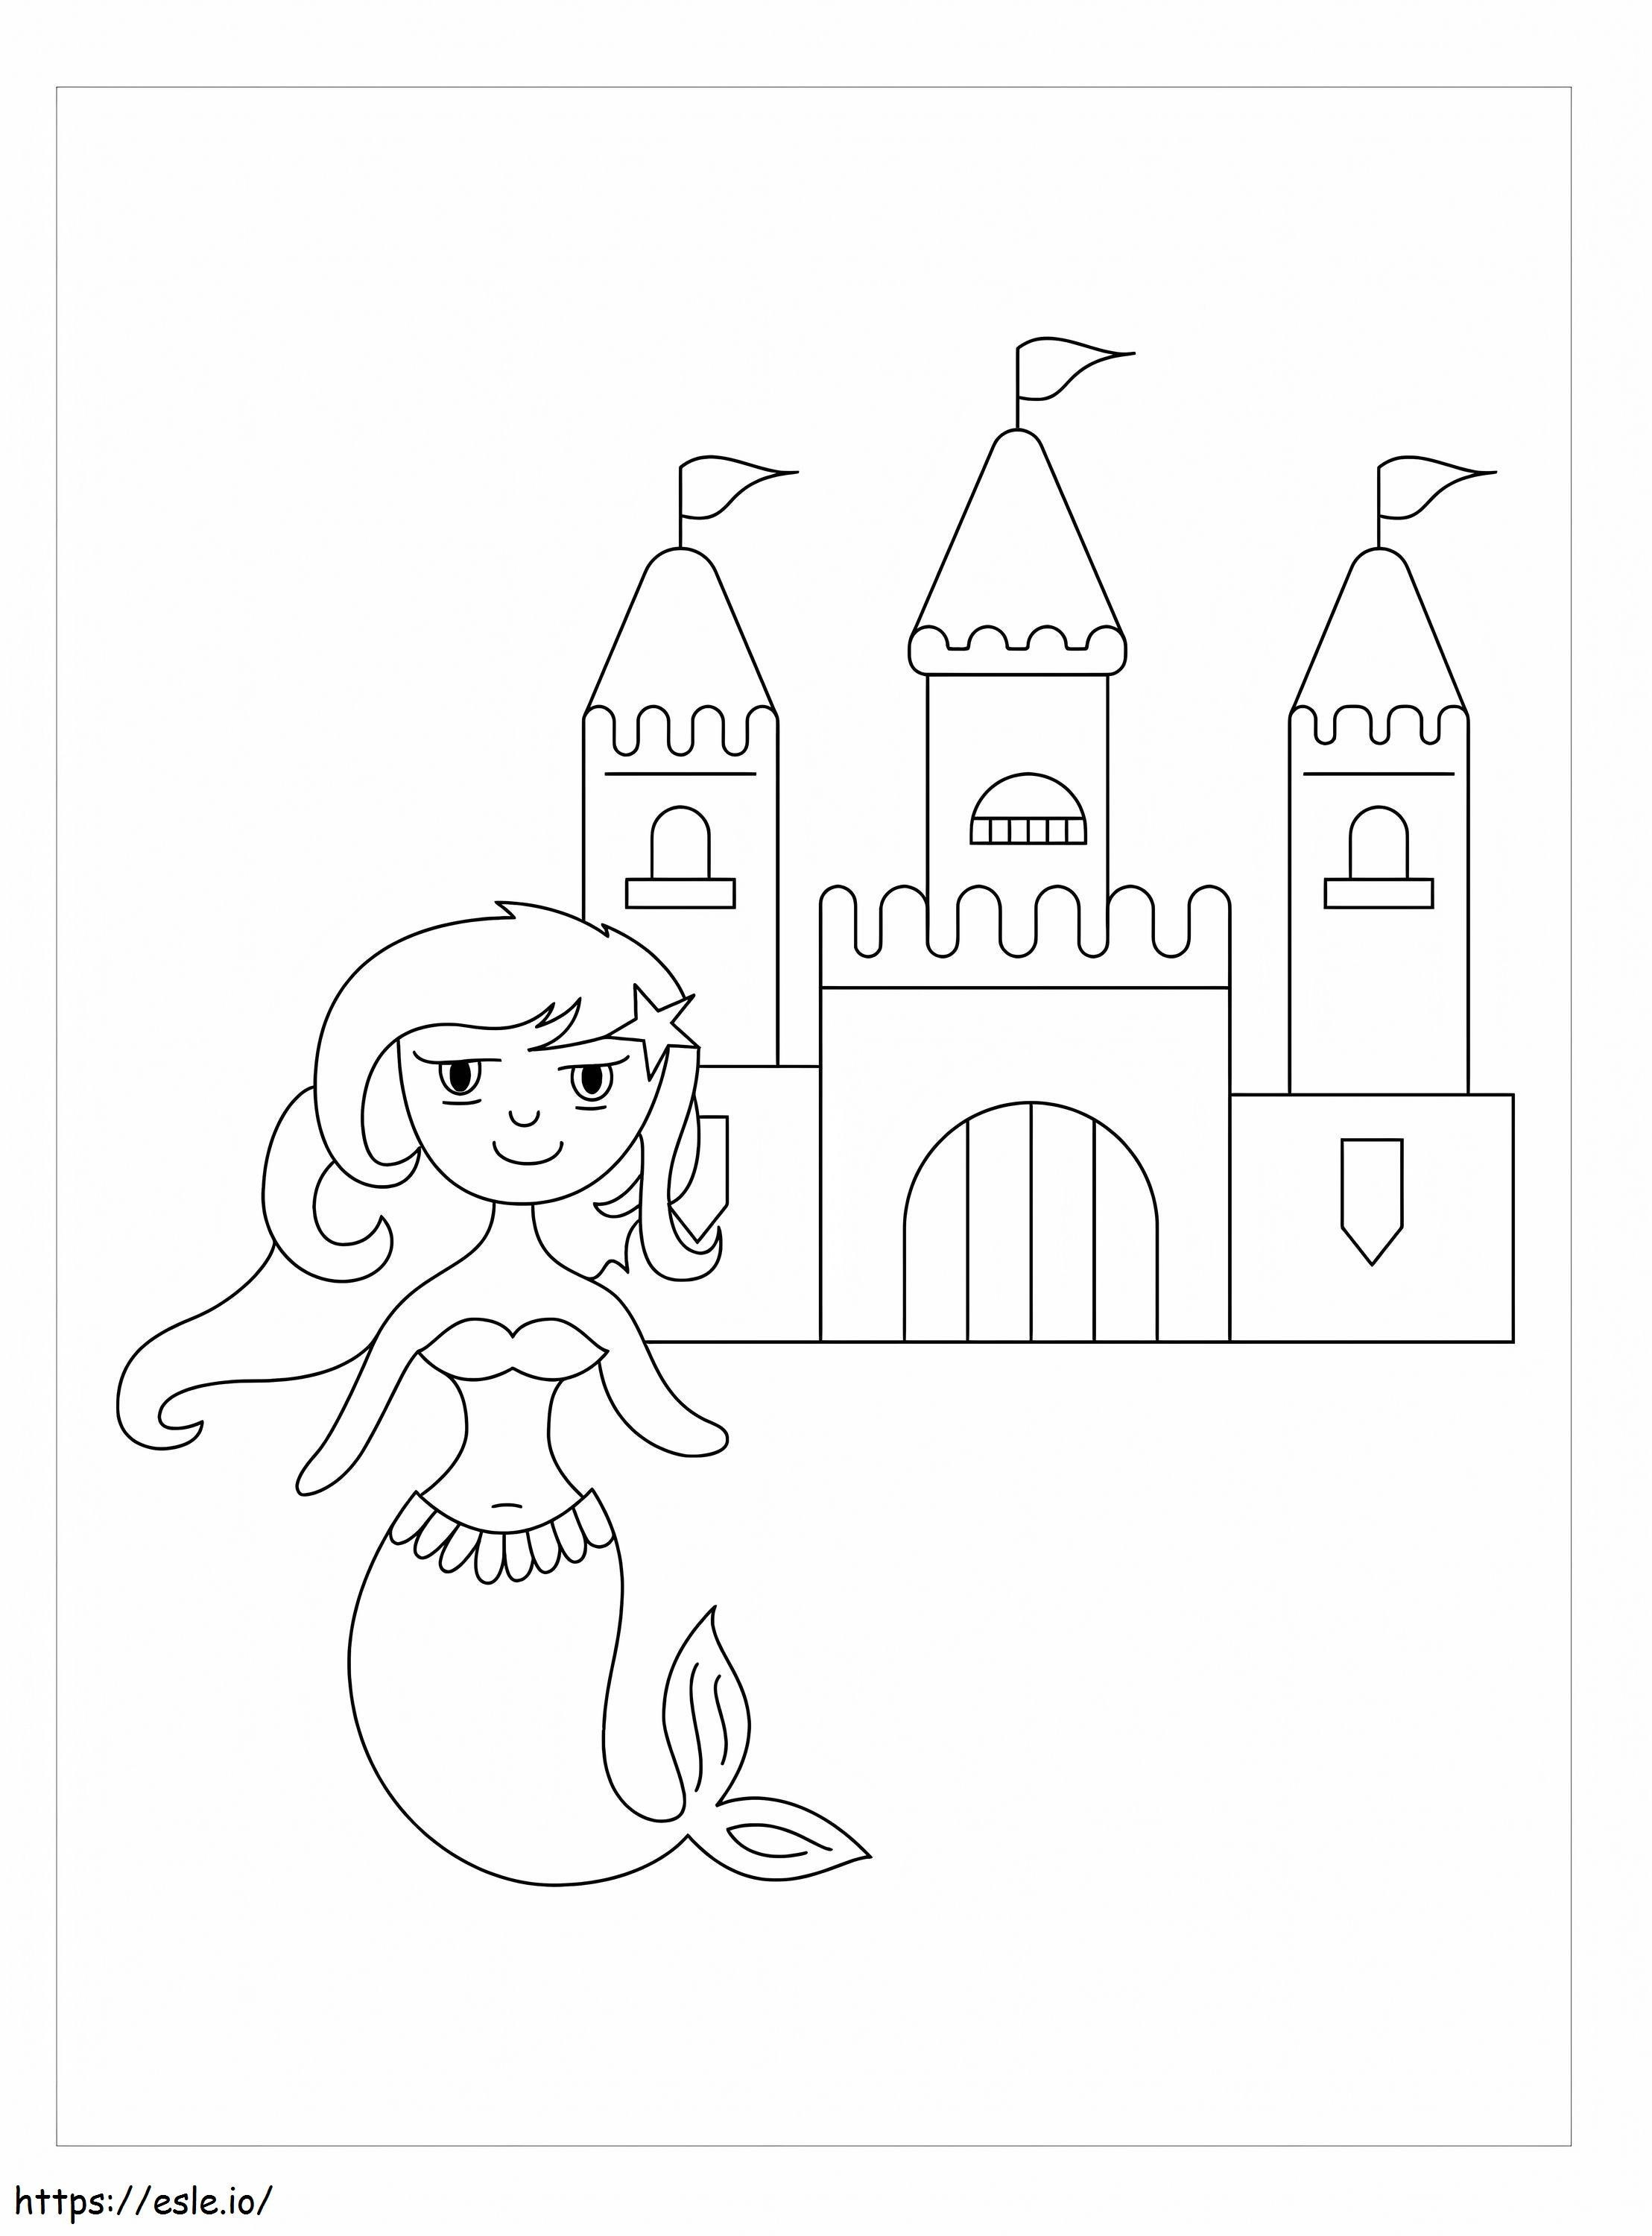 Mermaid With Castle coloring page